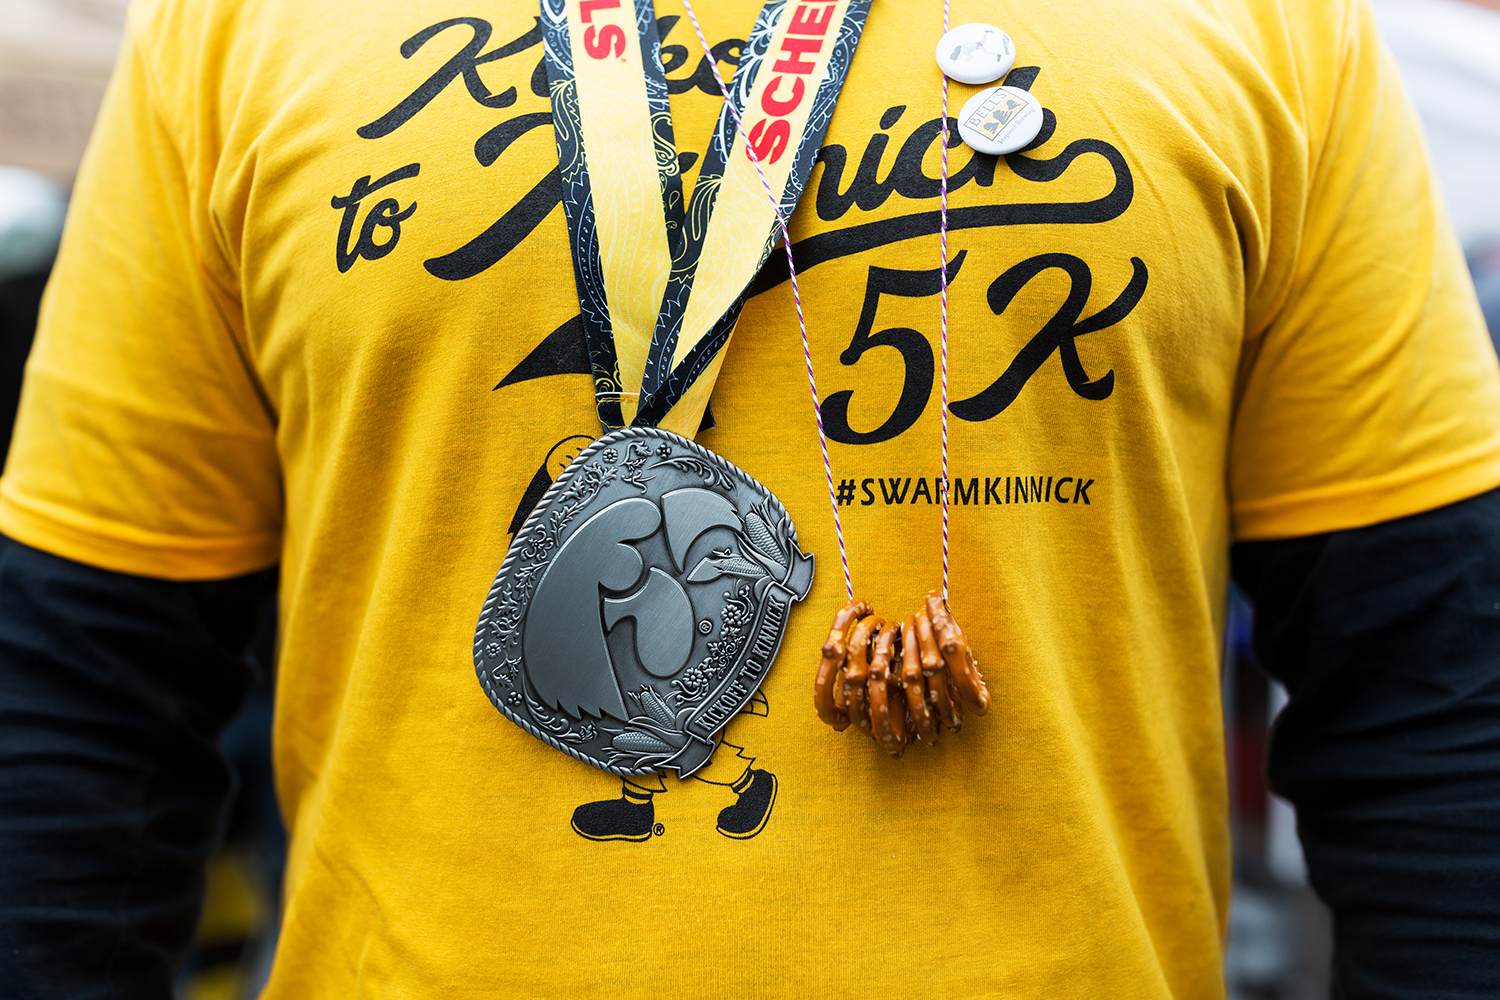  A participant in the Kickoff of Kinnick 5k race sports a medal and pretzel necklace at the Northside Oktoberfest in Iowa City on Saturday, Sep. 29, 2018.  